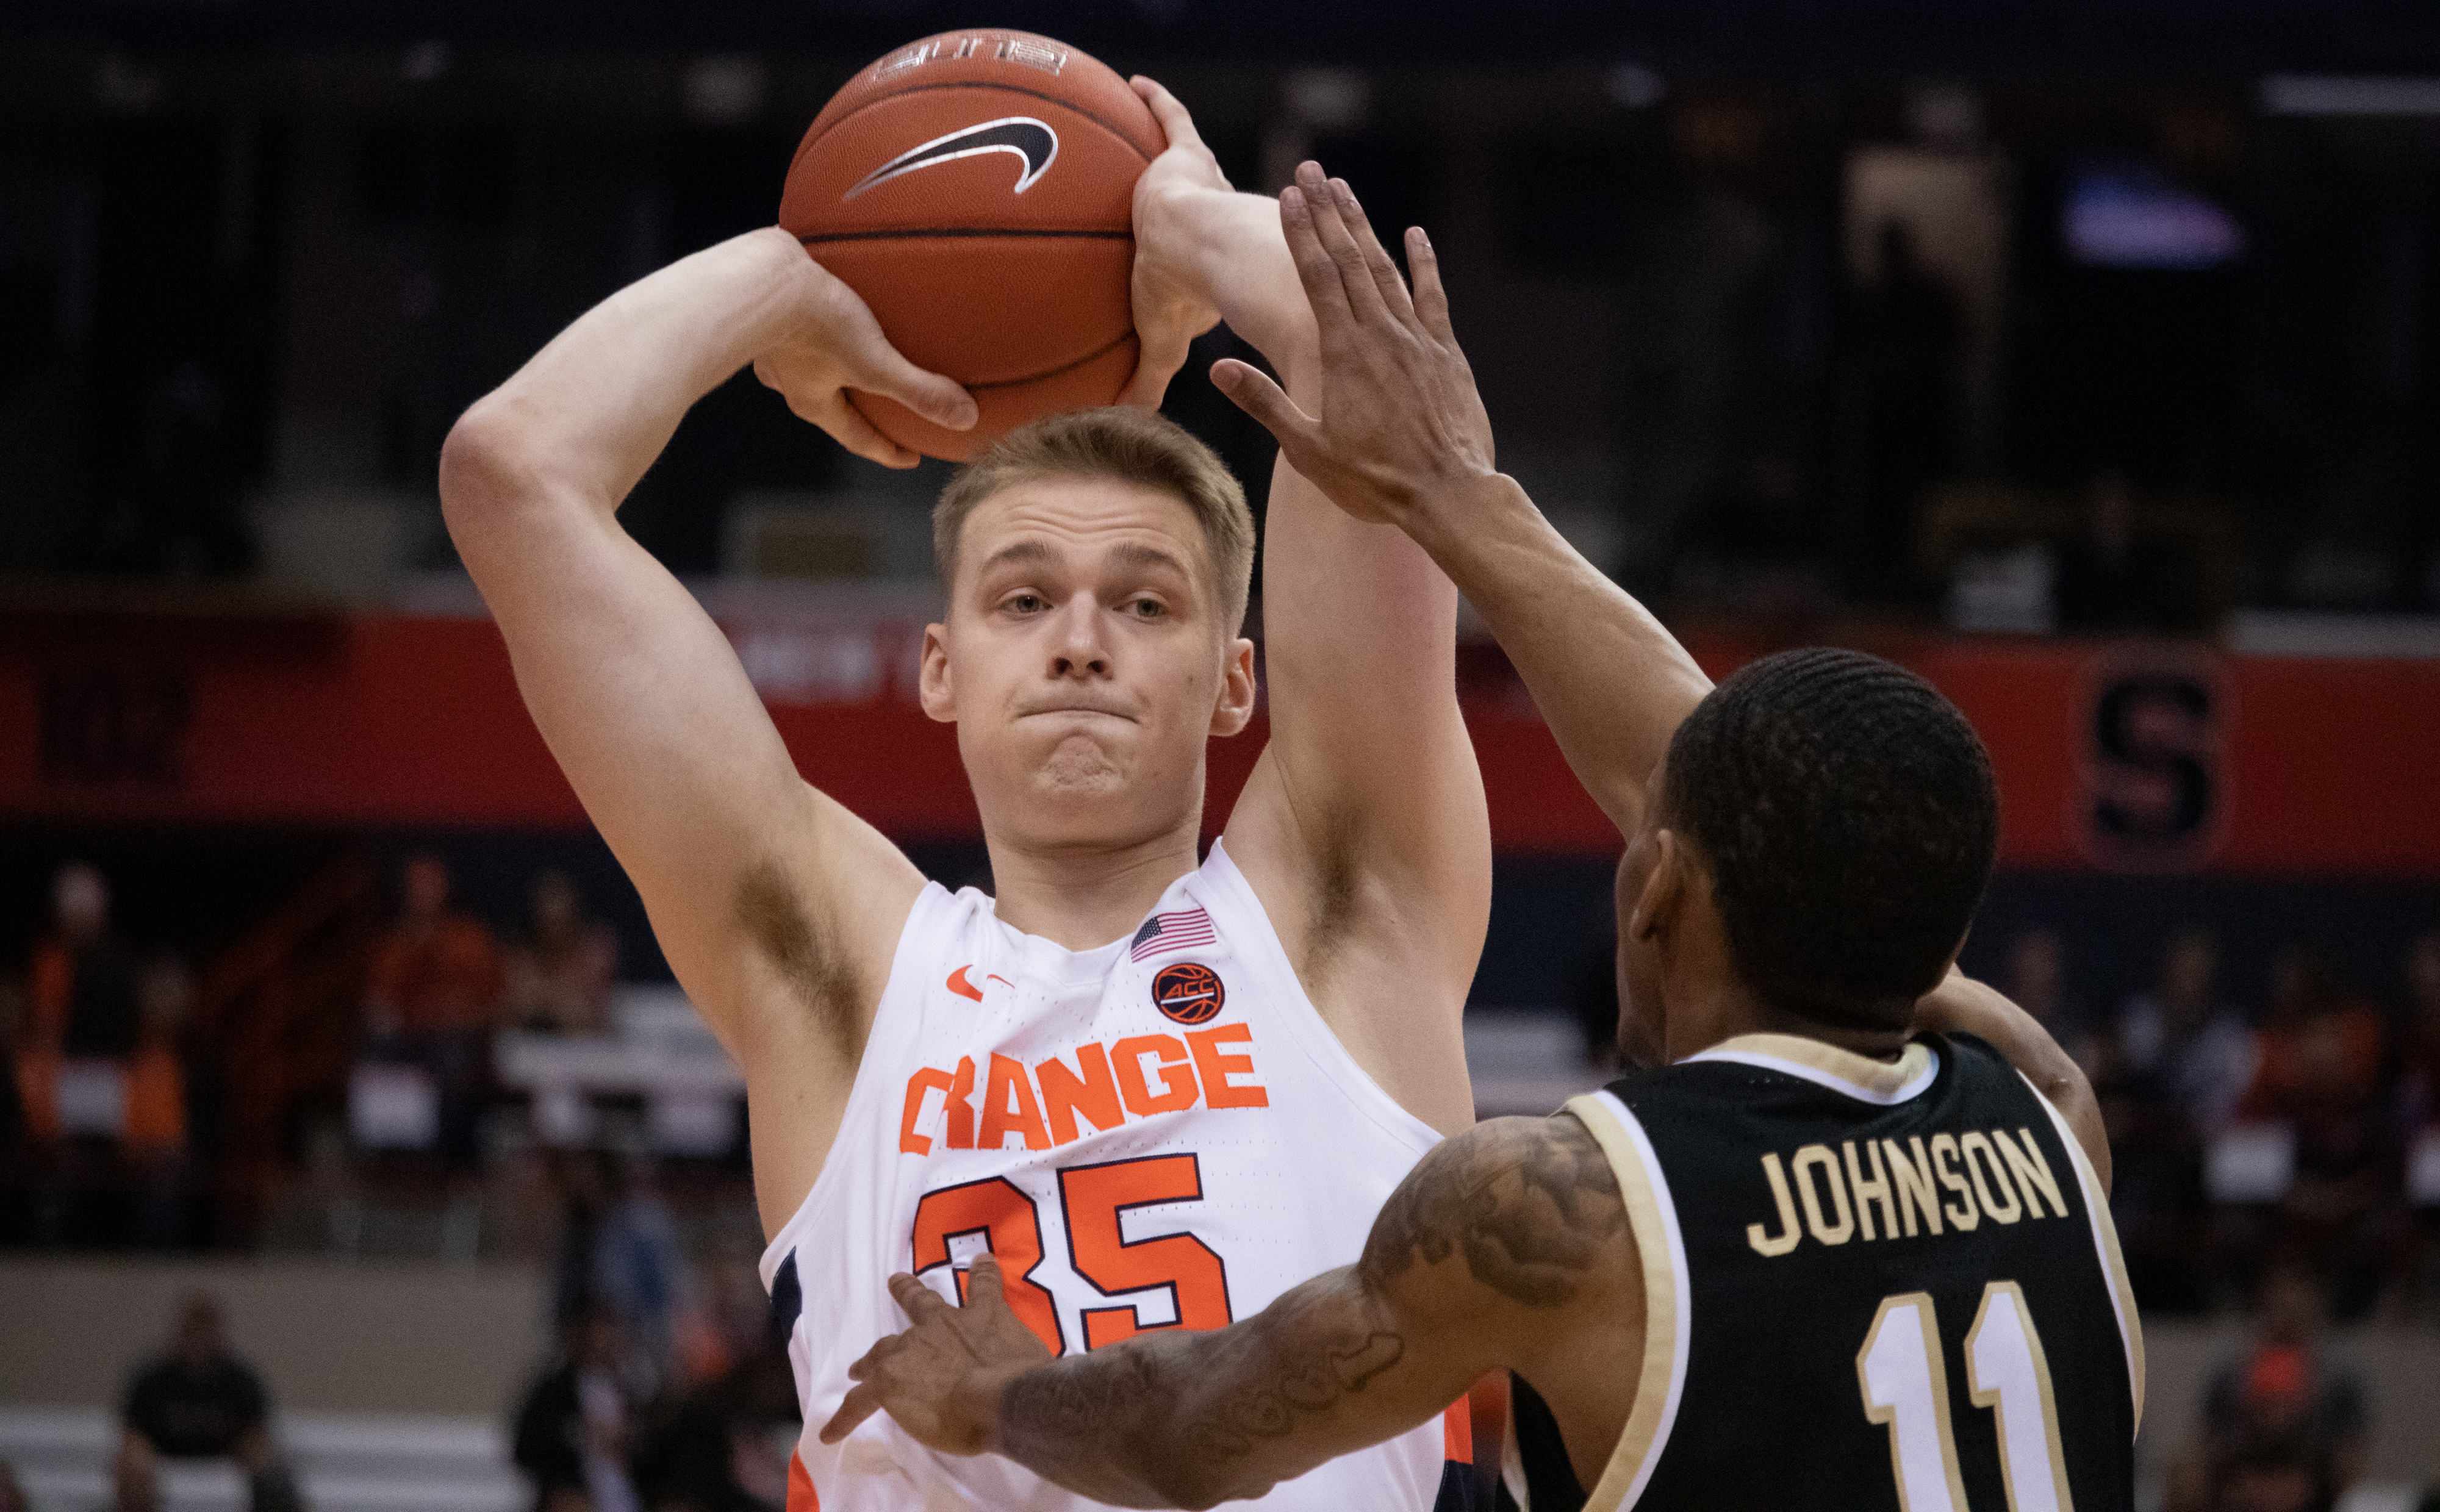 Syracuse guard, Buddy Boeheim, 35, gets ready to pass the ball to his teammates as Wake Forest guard Torry Johnson, 11, tries to block his pass during the first half of a college basketball game on February 8, 2020.